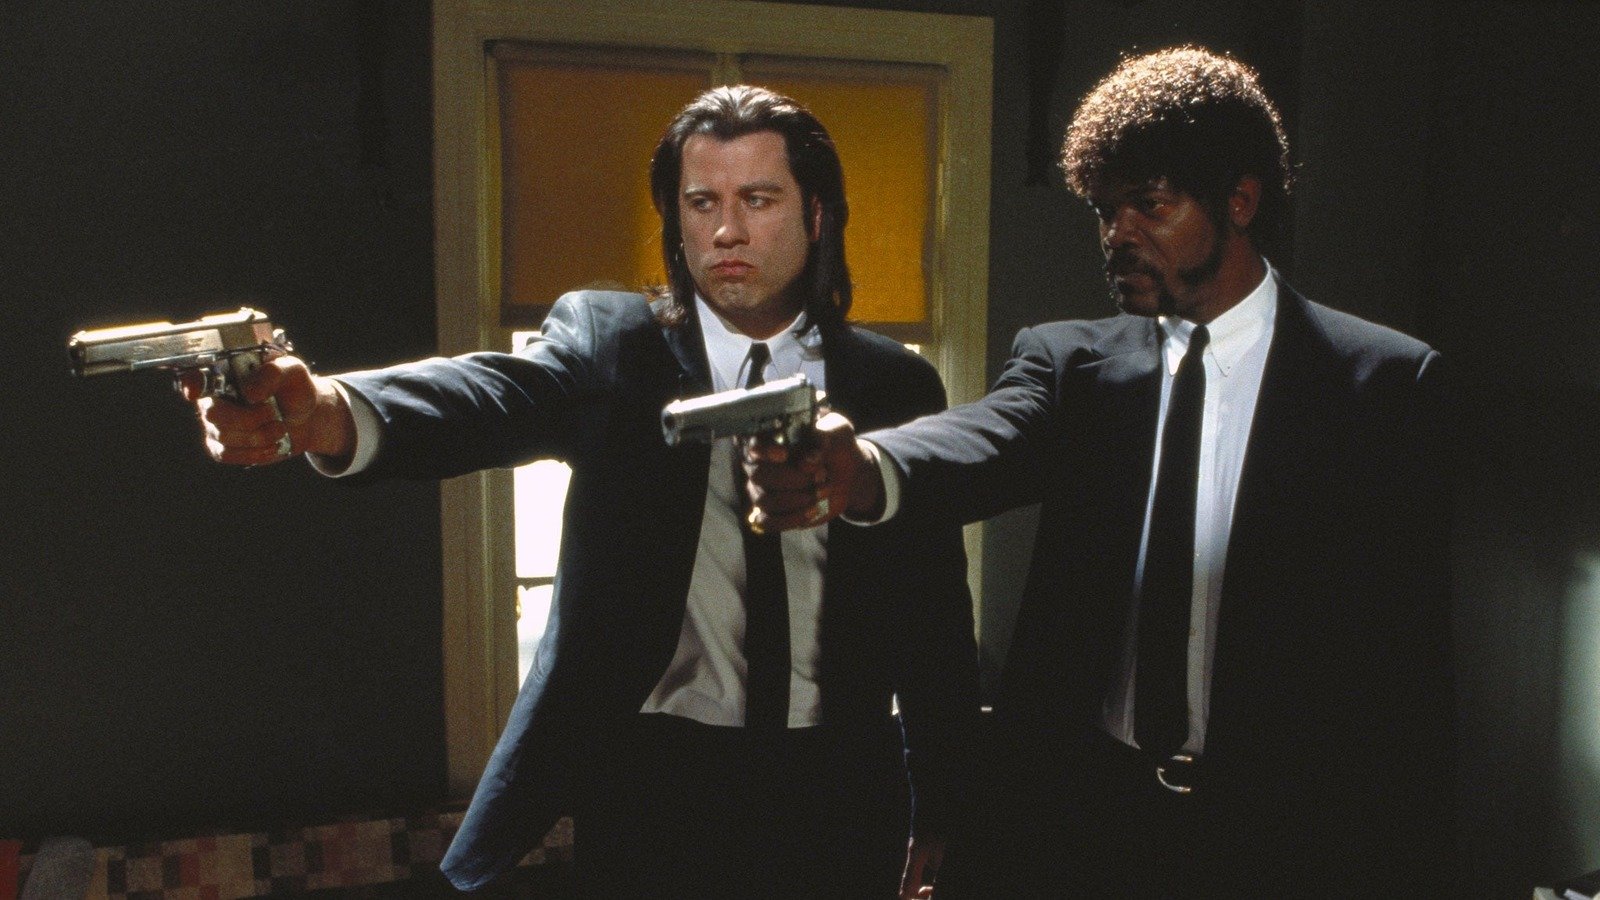 Pulp Fiction Ending Explained: Pride Comes Before The Fall - /Film